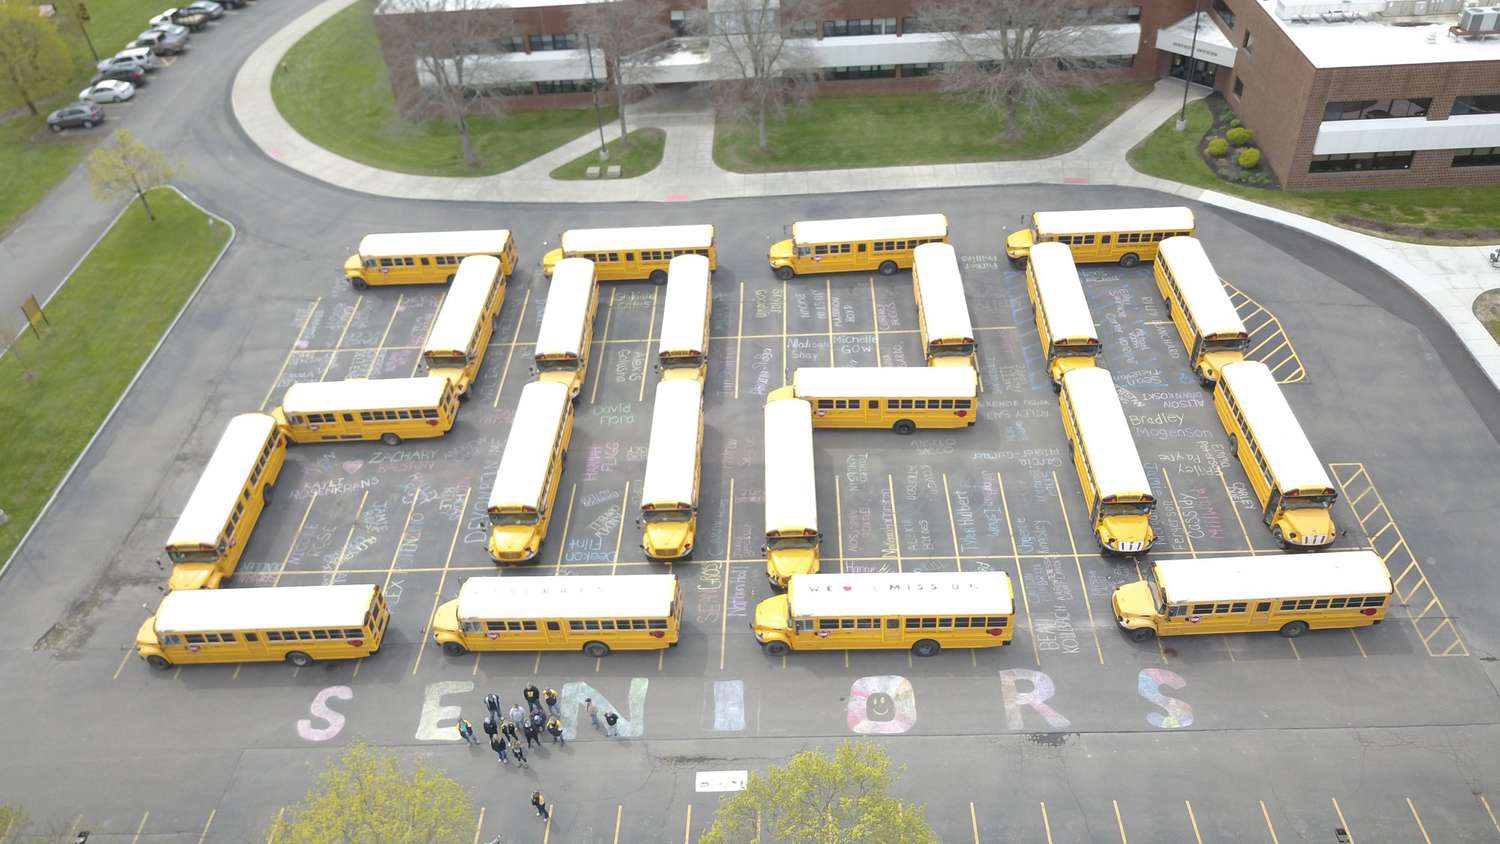 New York Bus Drivers Arrange 22 School Buses to Spell '2020' in Tribute to Graduating Class